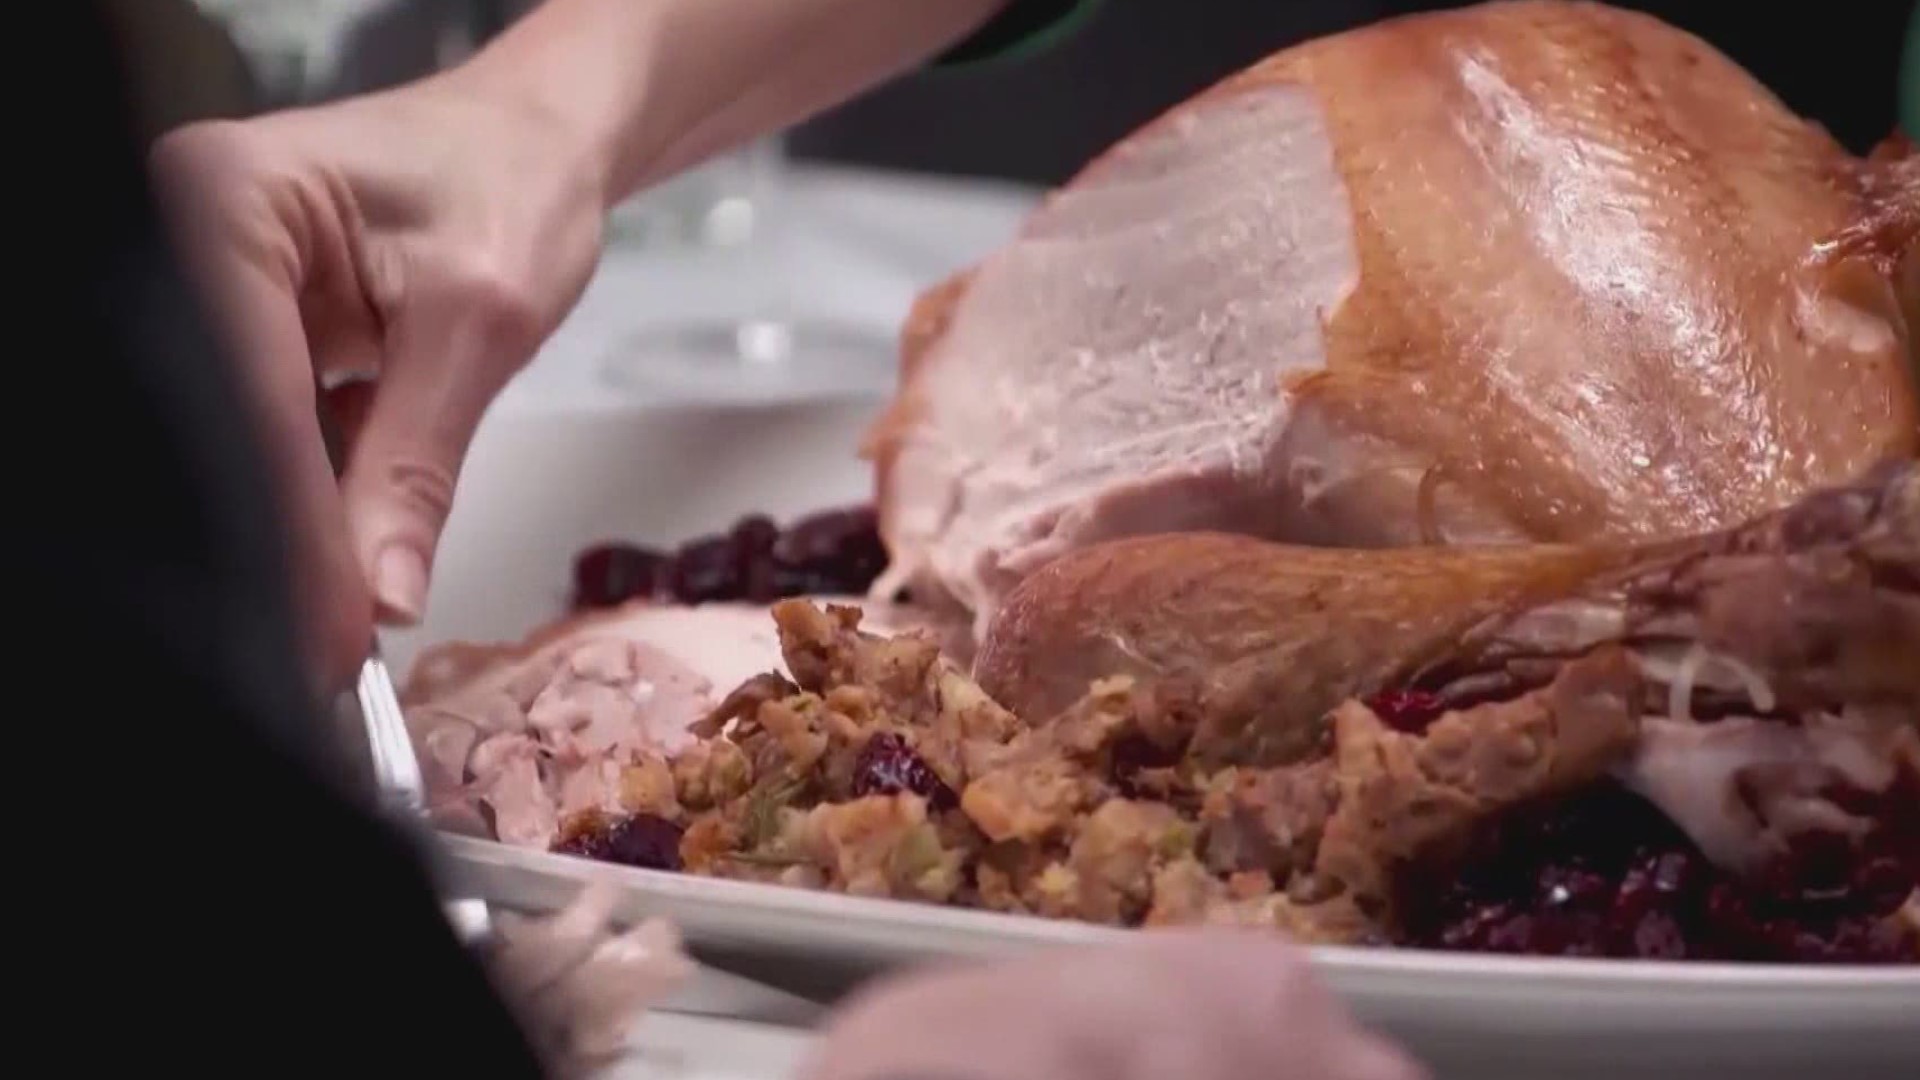 How to enjoy your Thanksgiving leftovers without making yourself sick.